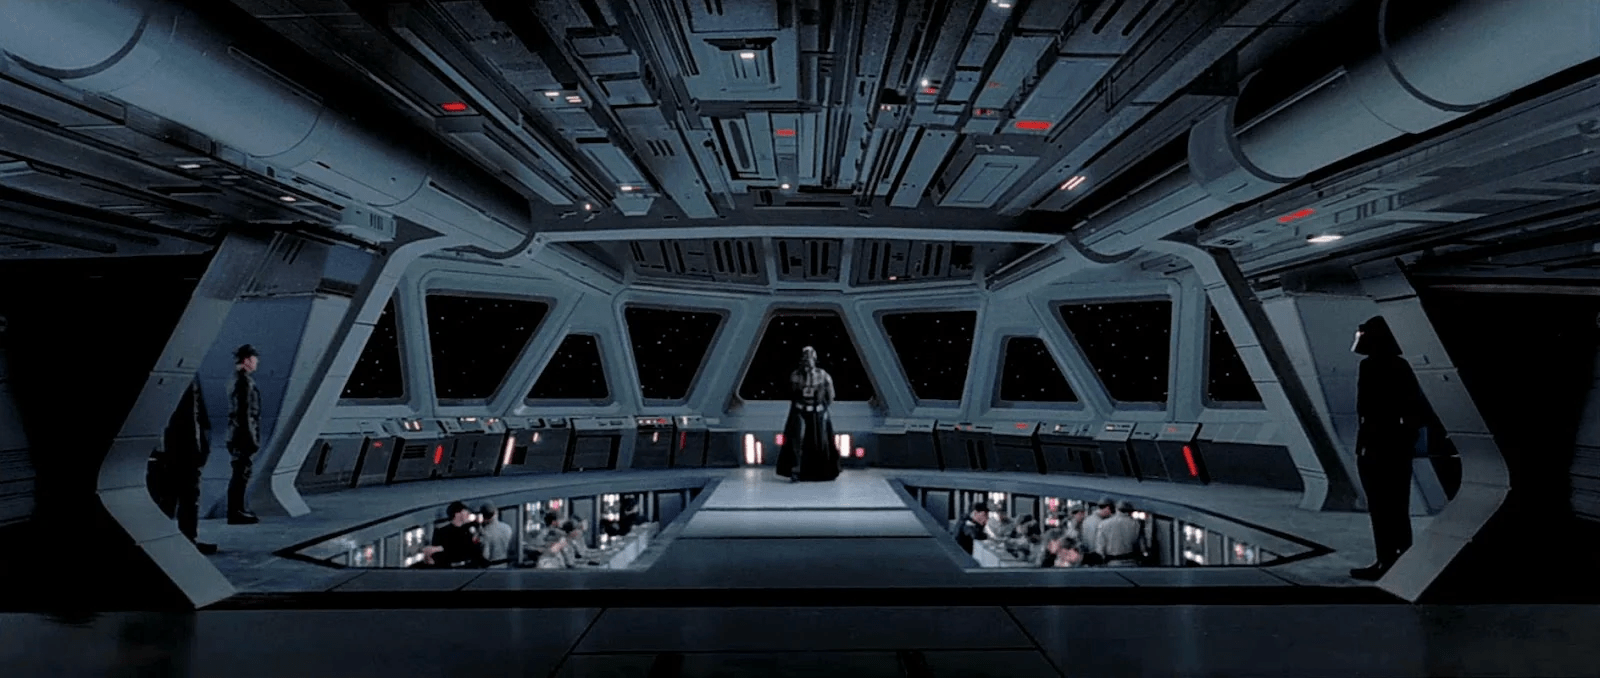 The bridge of The Executor, Sith Lord Darth Vader's personal flagship.